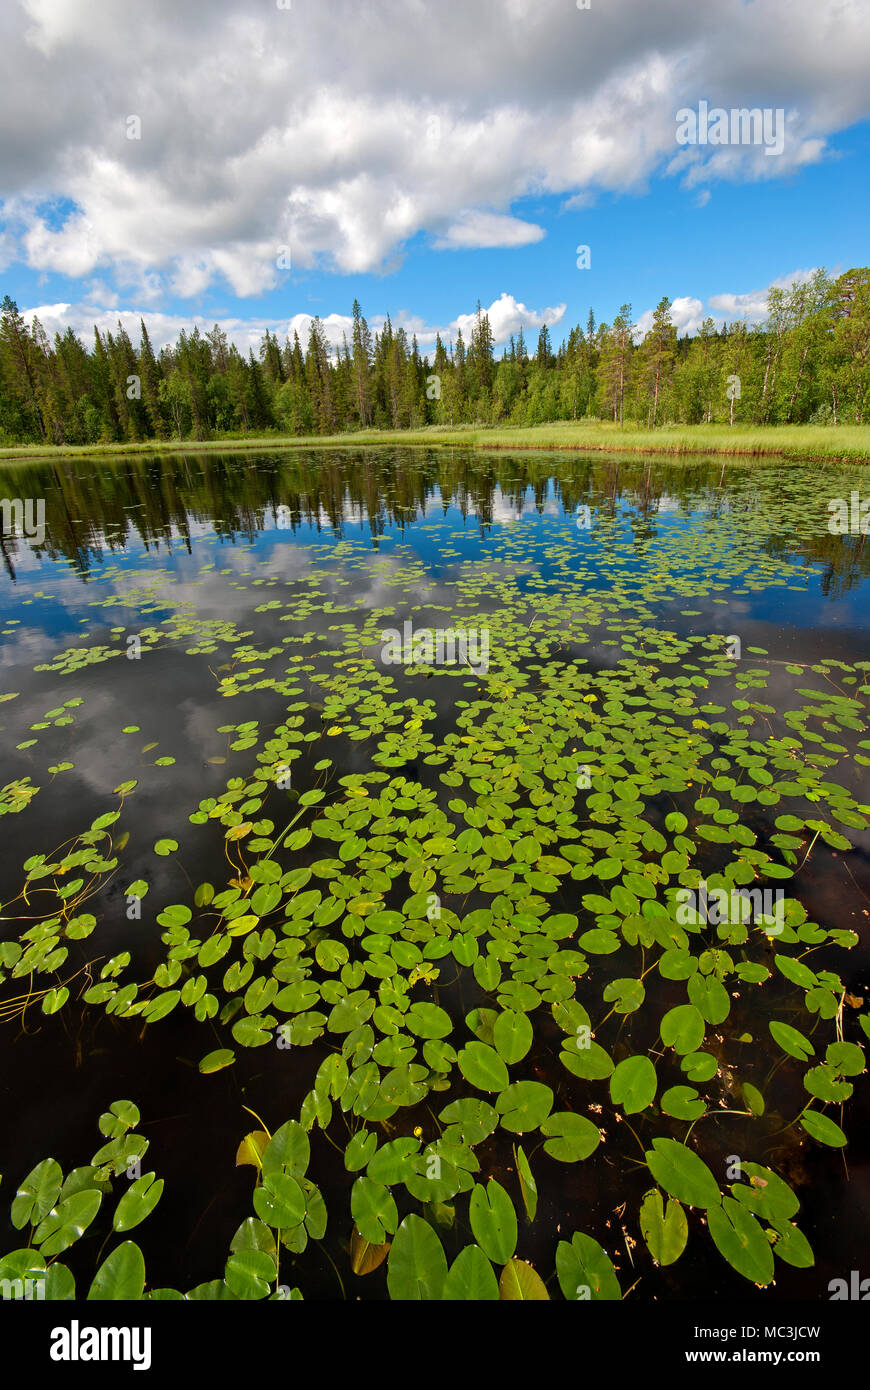 Small lake with water lily leaves (Nymphaea), Swedish Lapland near Gallivare, Norrbotten County, Sweden Stock Photo